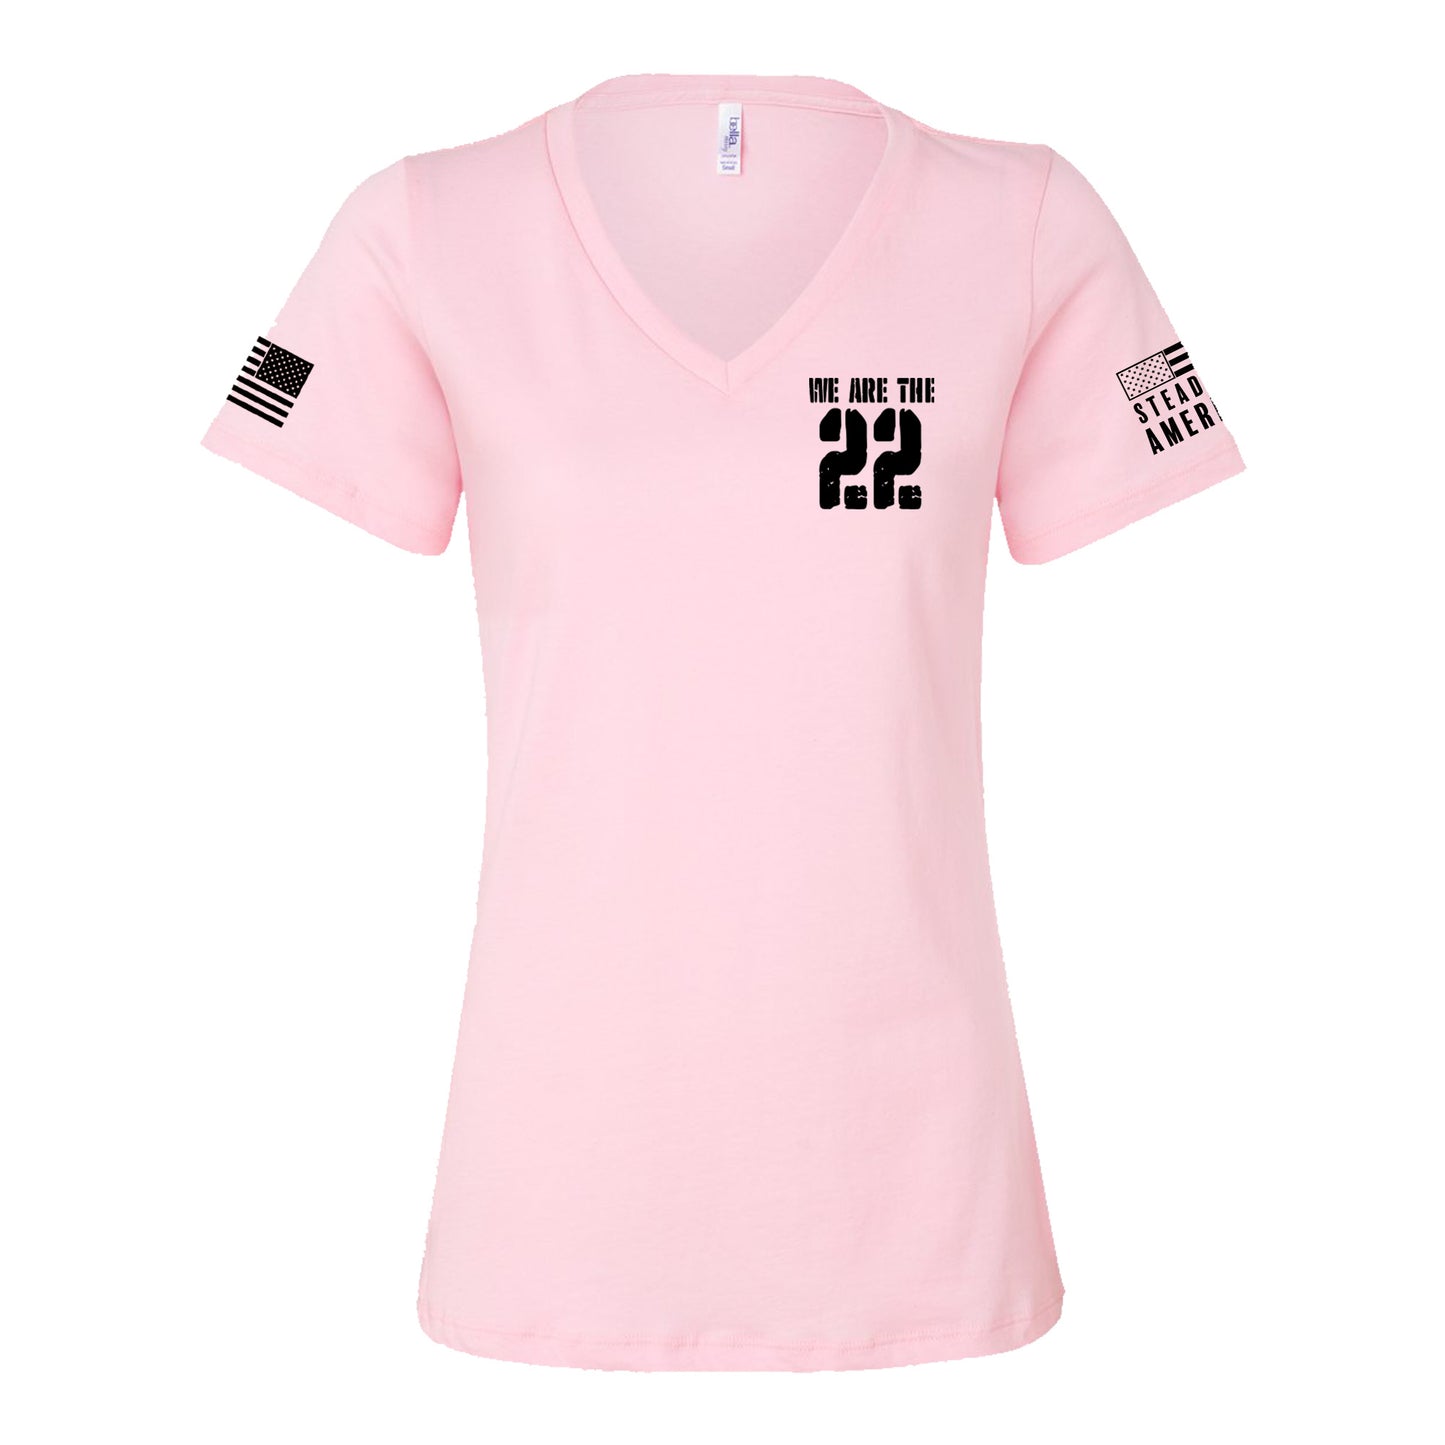 We Are The 22, Bella Canvas Women's Relaxed Jersey V-Neck, Pink